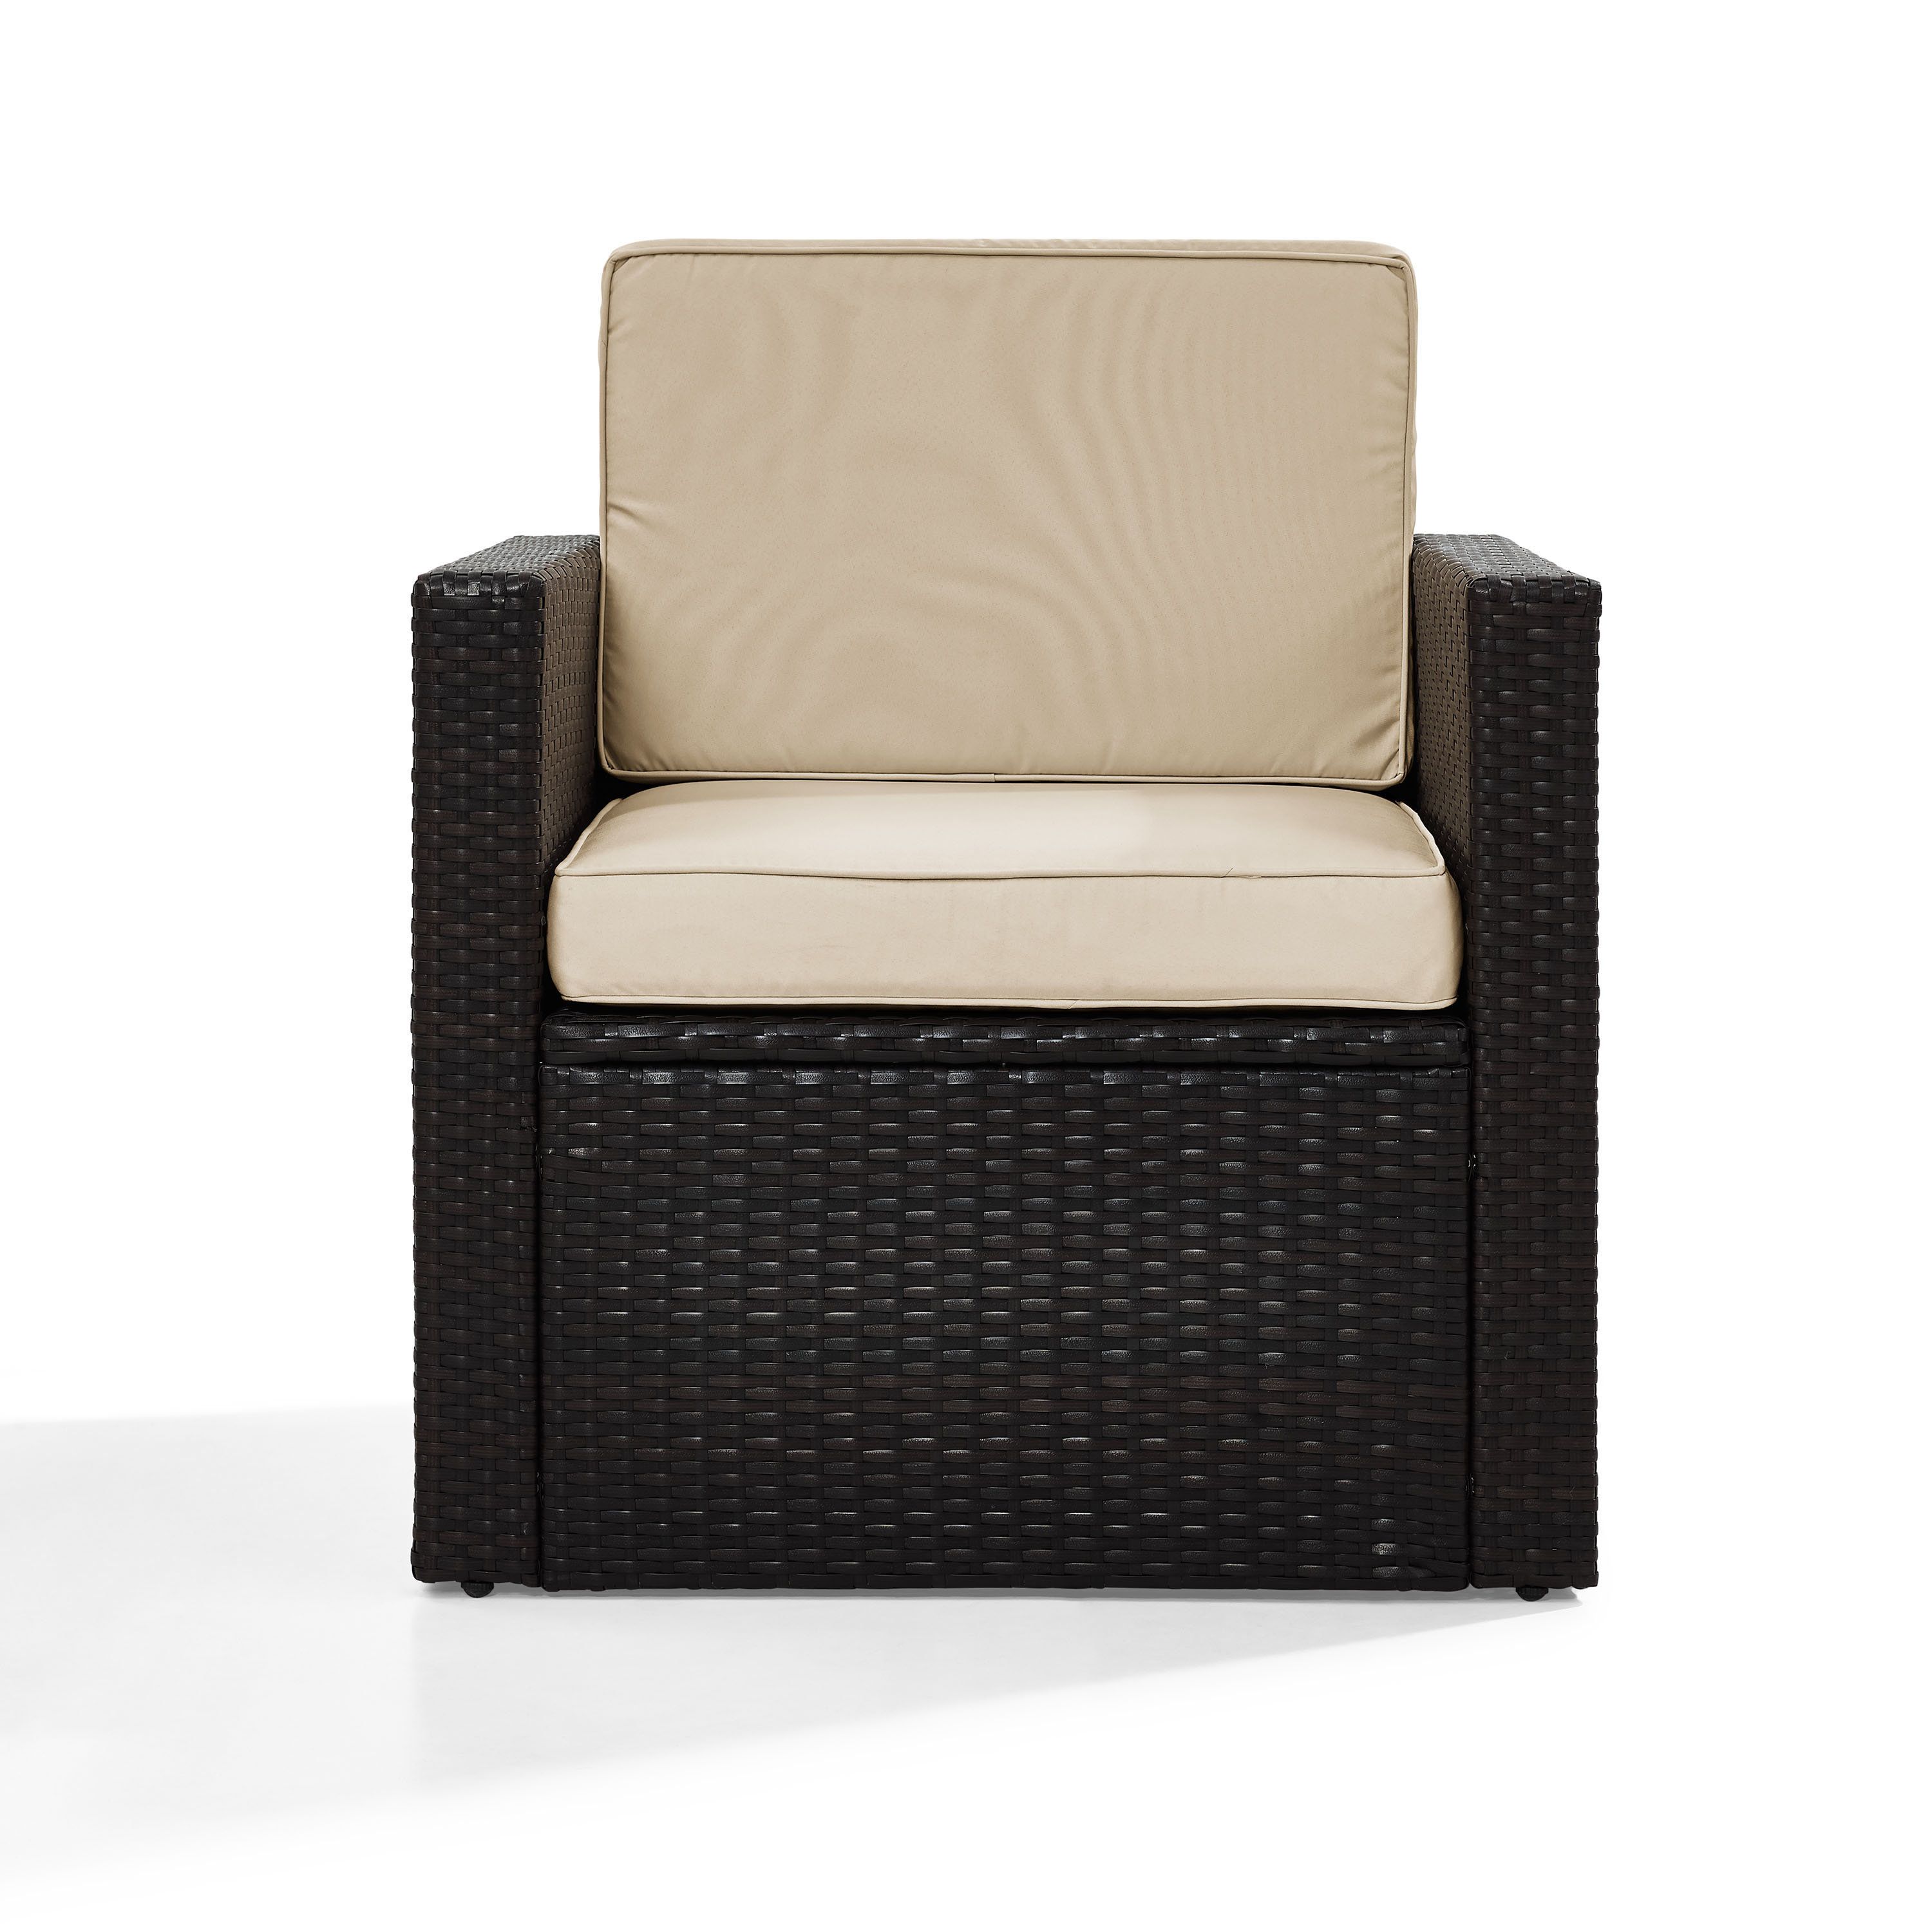 Belton Patio Sofas With Cushions Intended For 2019 Belton Outdoor Wicker Deep Seating Patio Chair With Cushion (View 5 of 25)